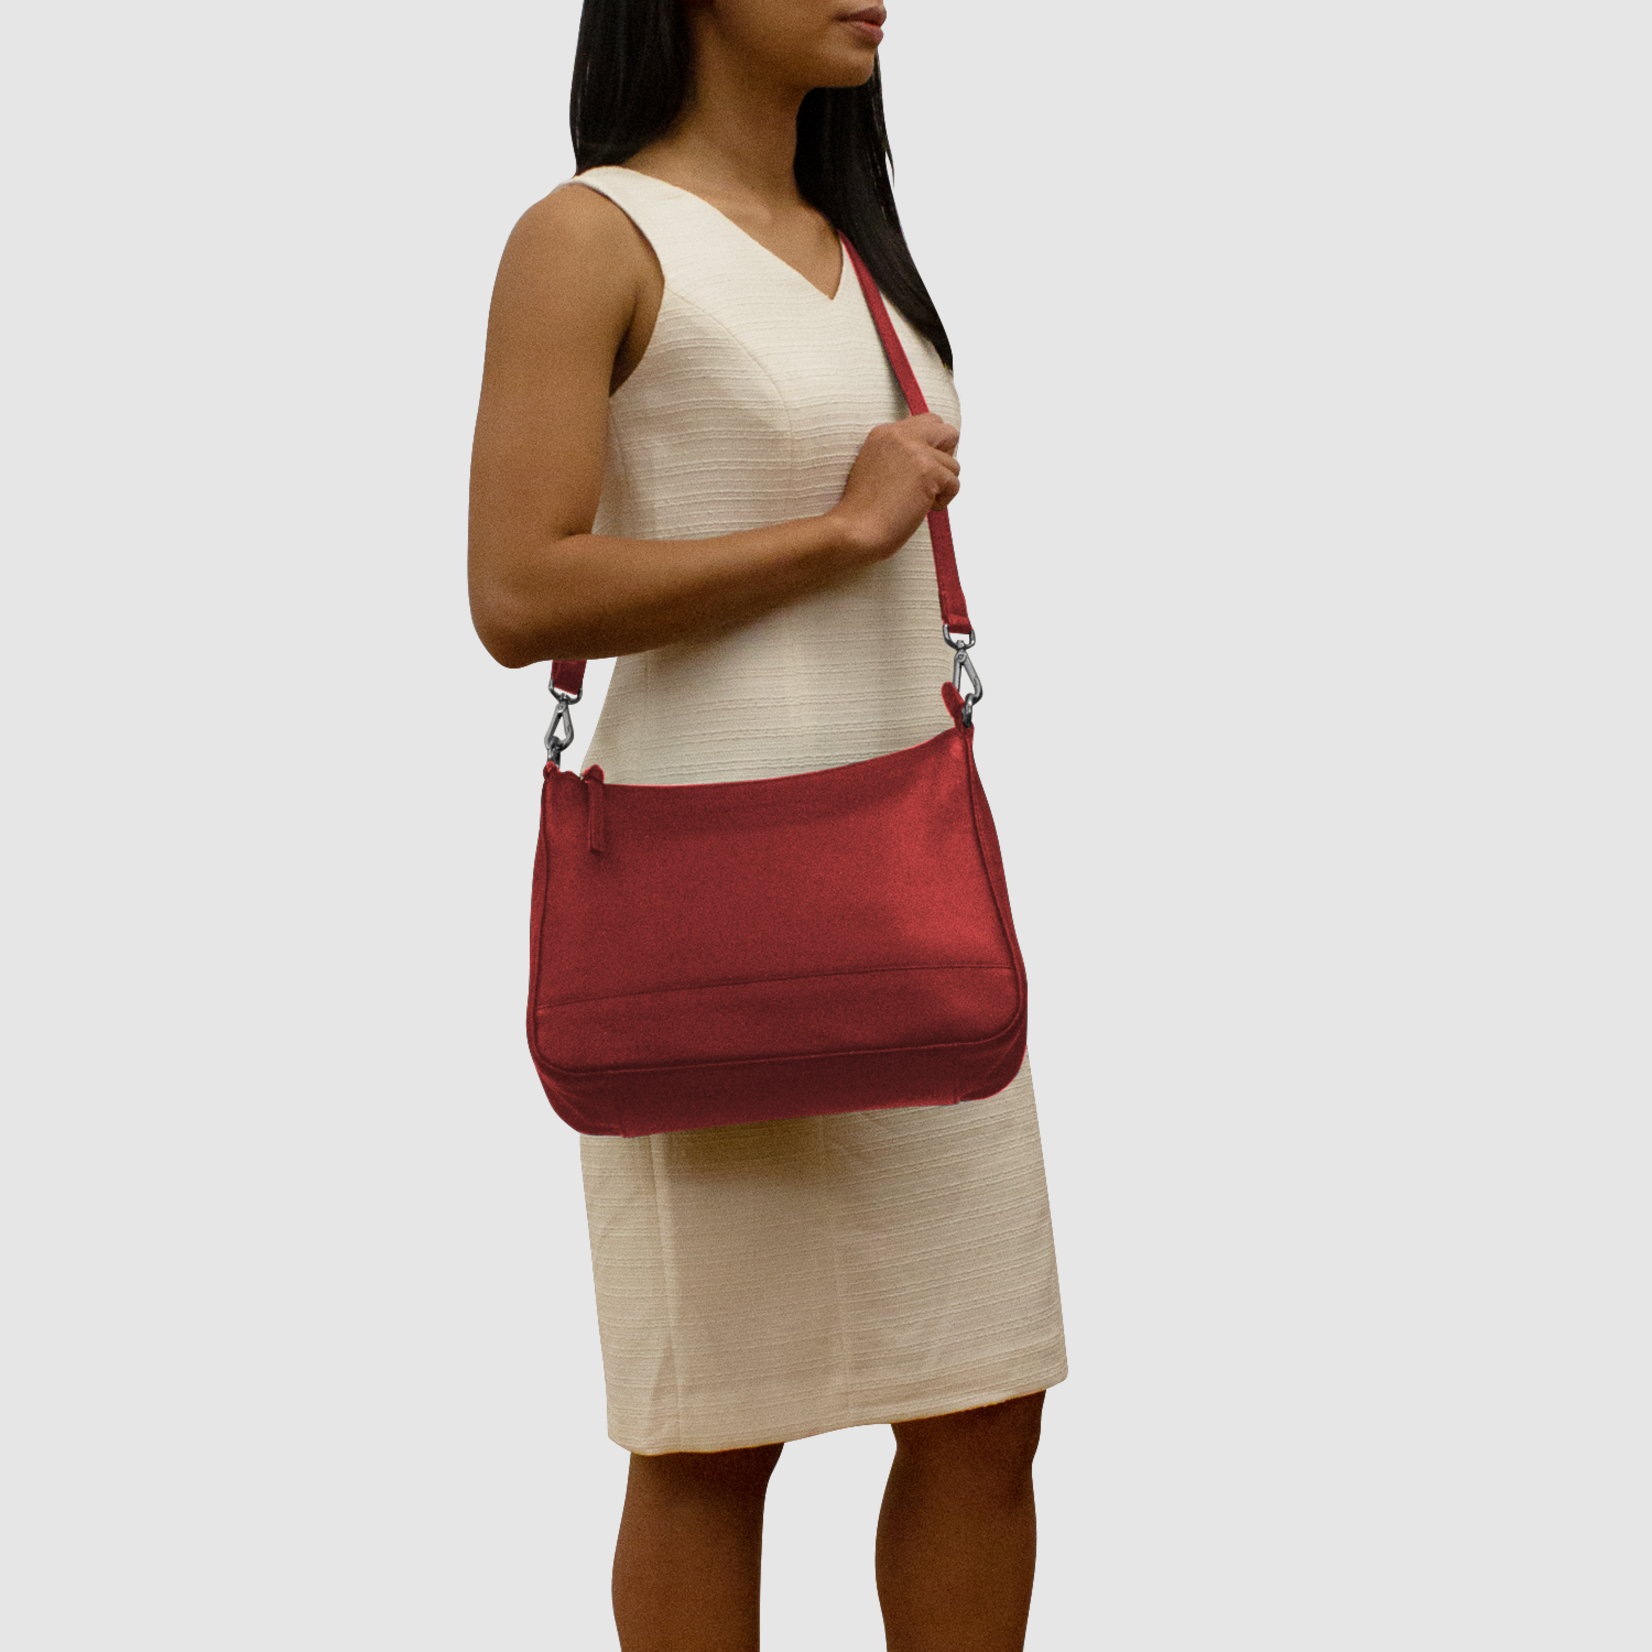 Leather Handbags and Accessories 6091 Red - Zip Top Hobo